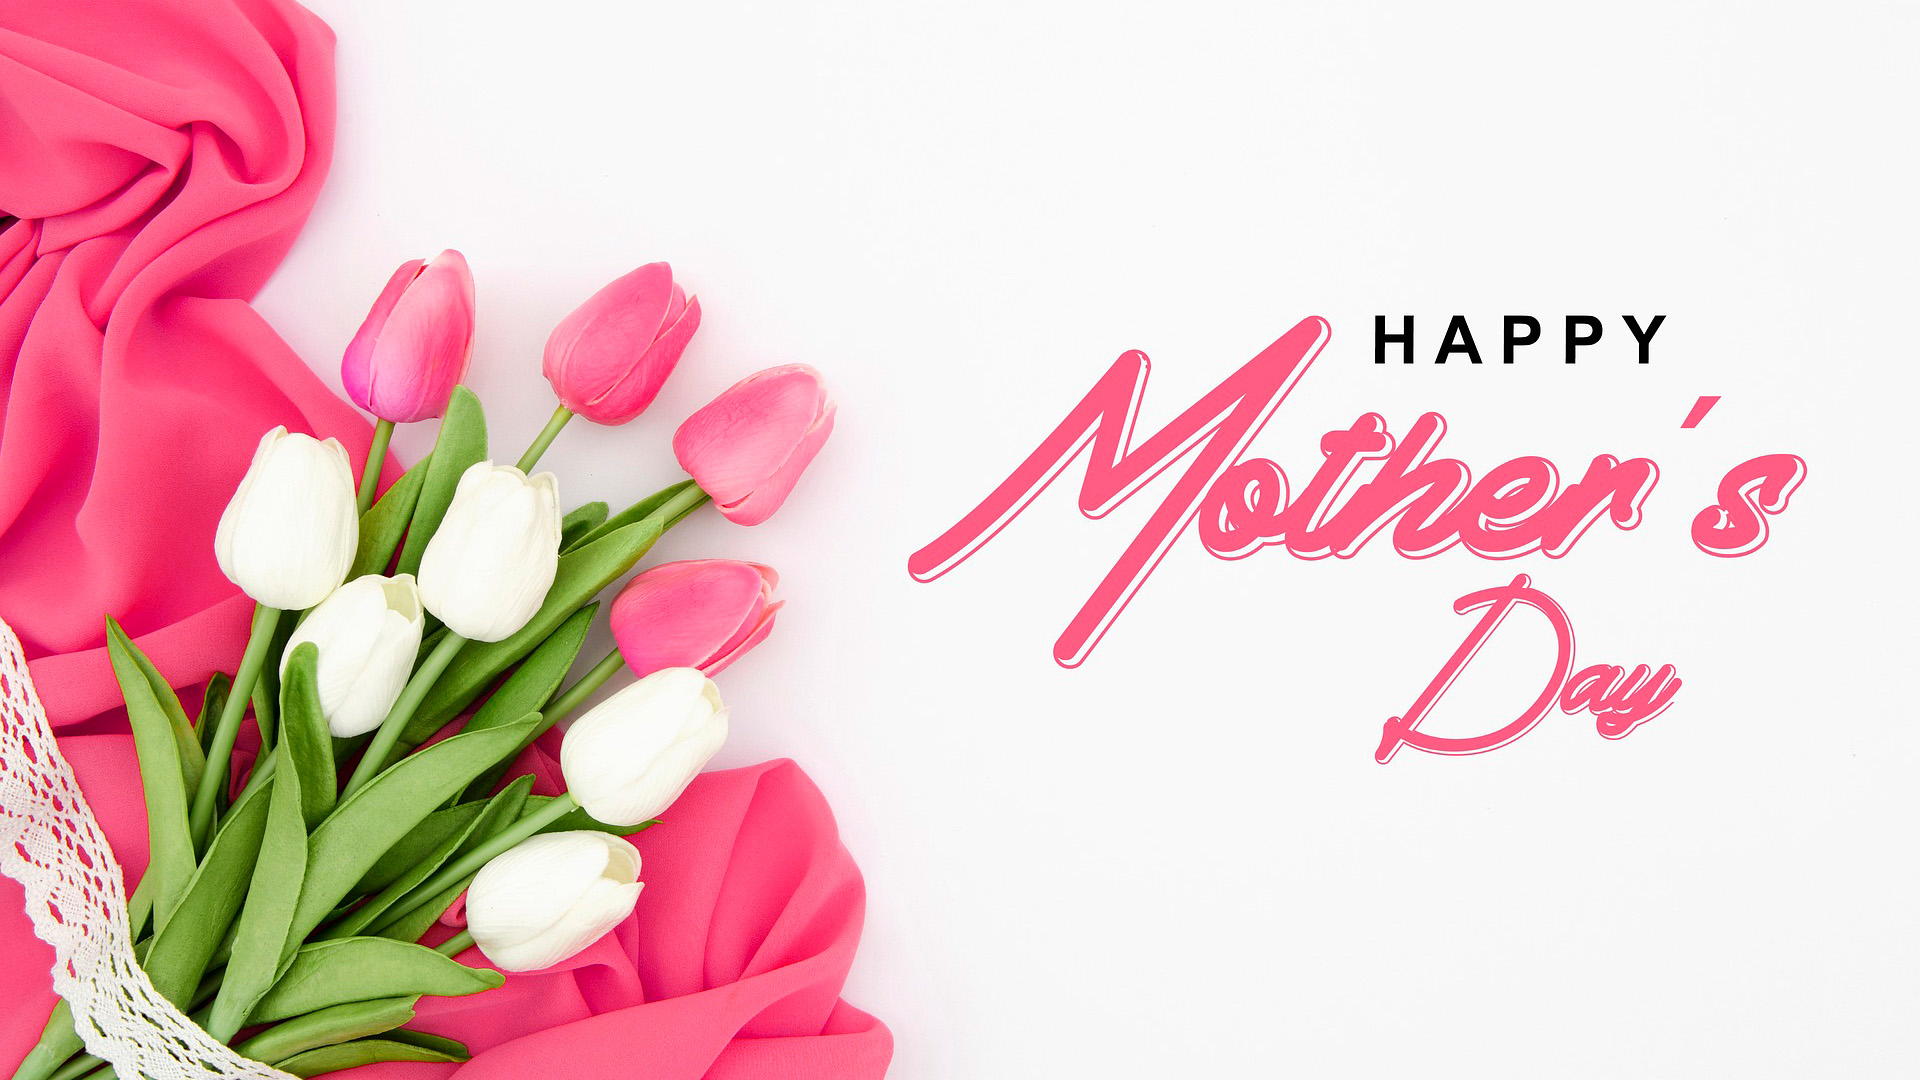 White background with pink and white tulips laying on the left side of the image on top of a pink sheer piece of fabric. On the right side of the page cursive pink text spells out Happy Mother's Day